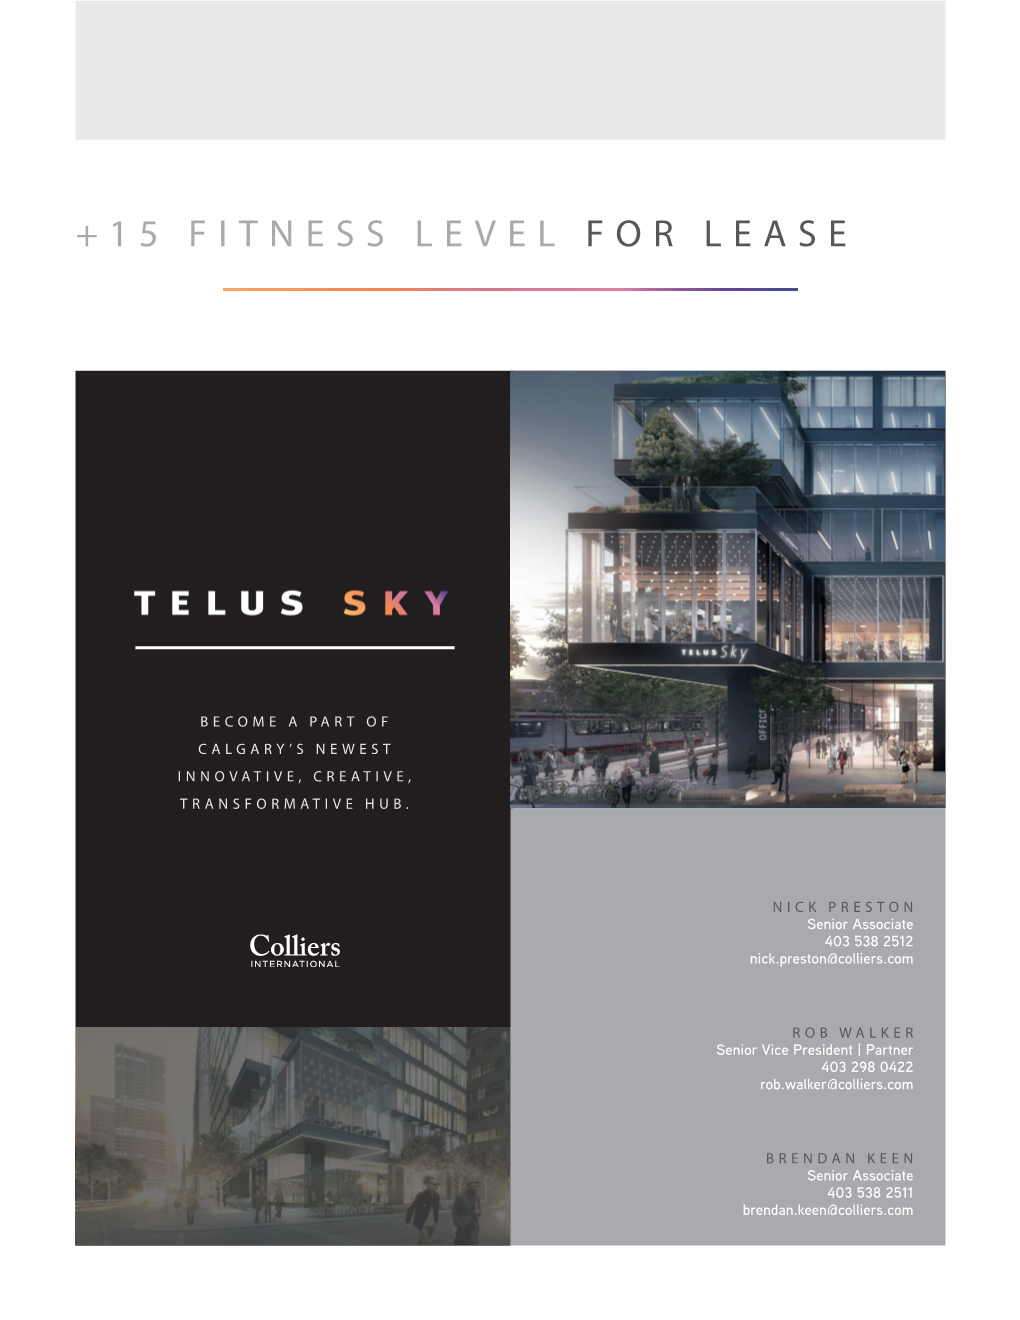 +15 Fitness Level for Lease